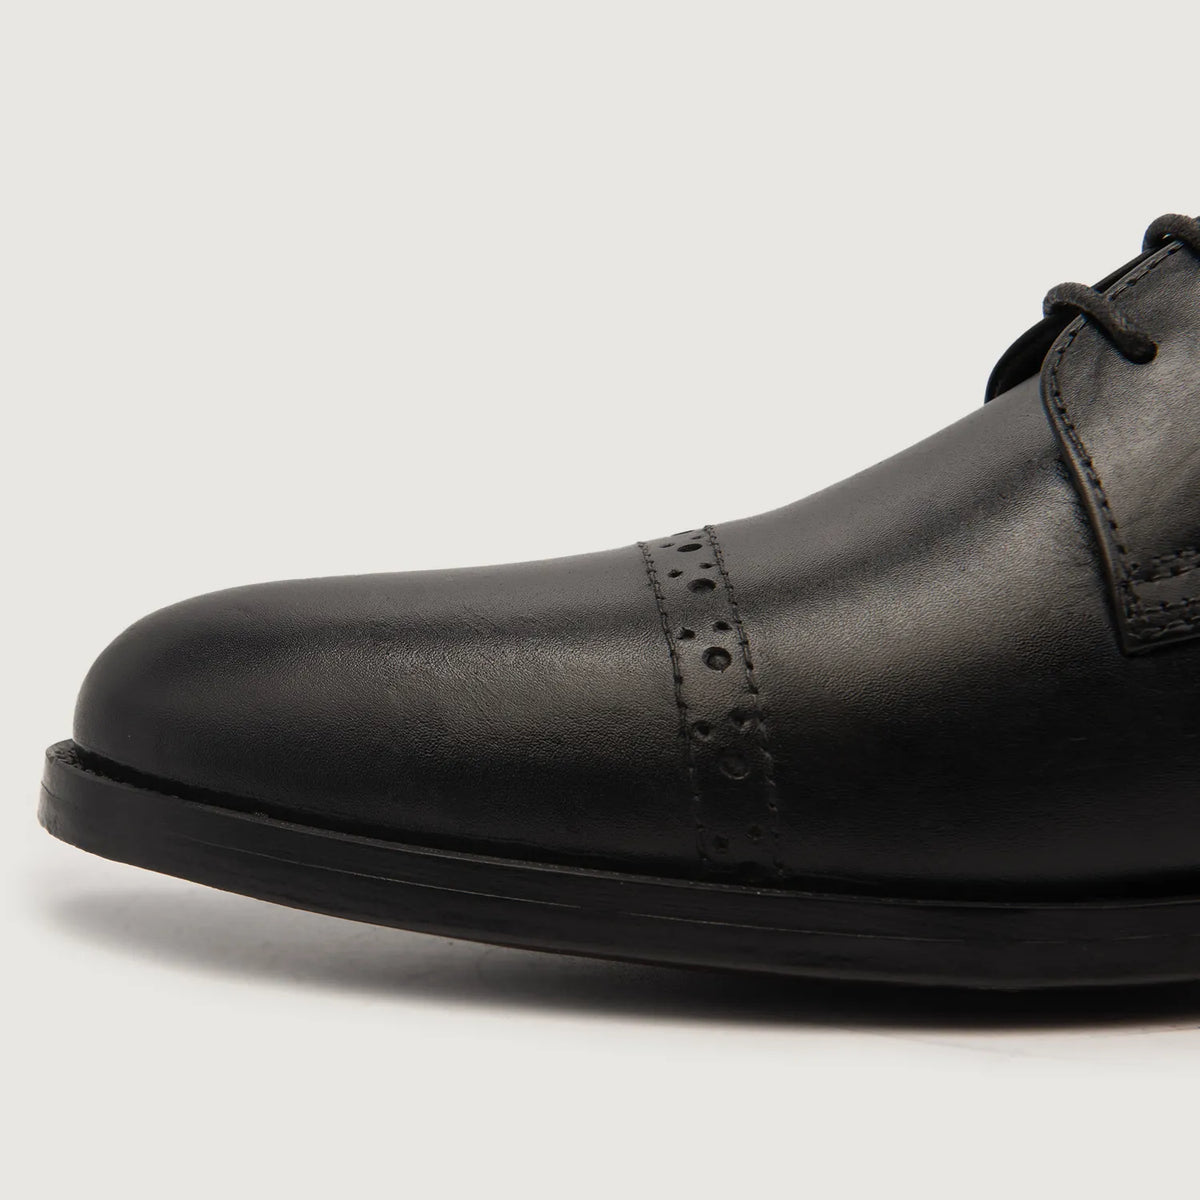 Dirk Brogues Derby Black Leather Shoes